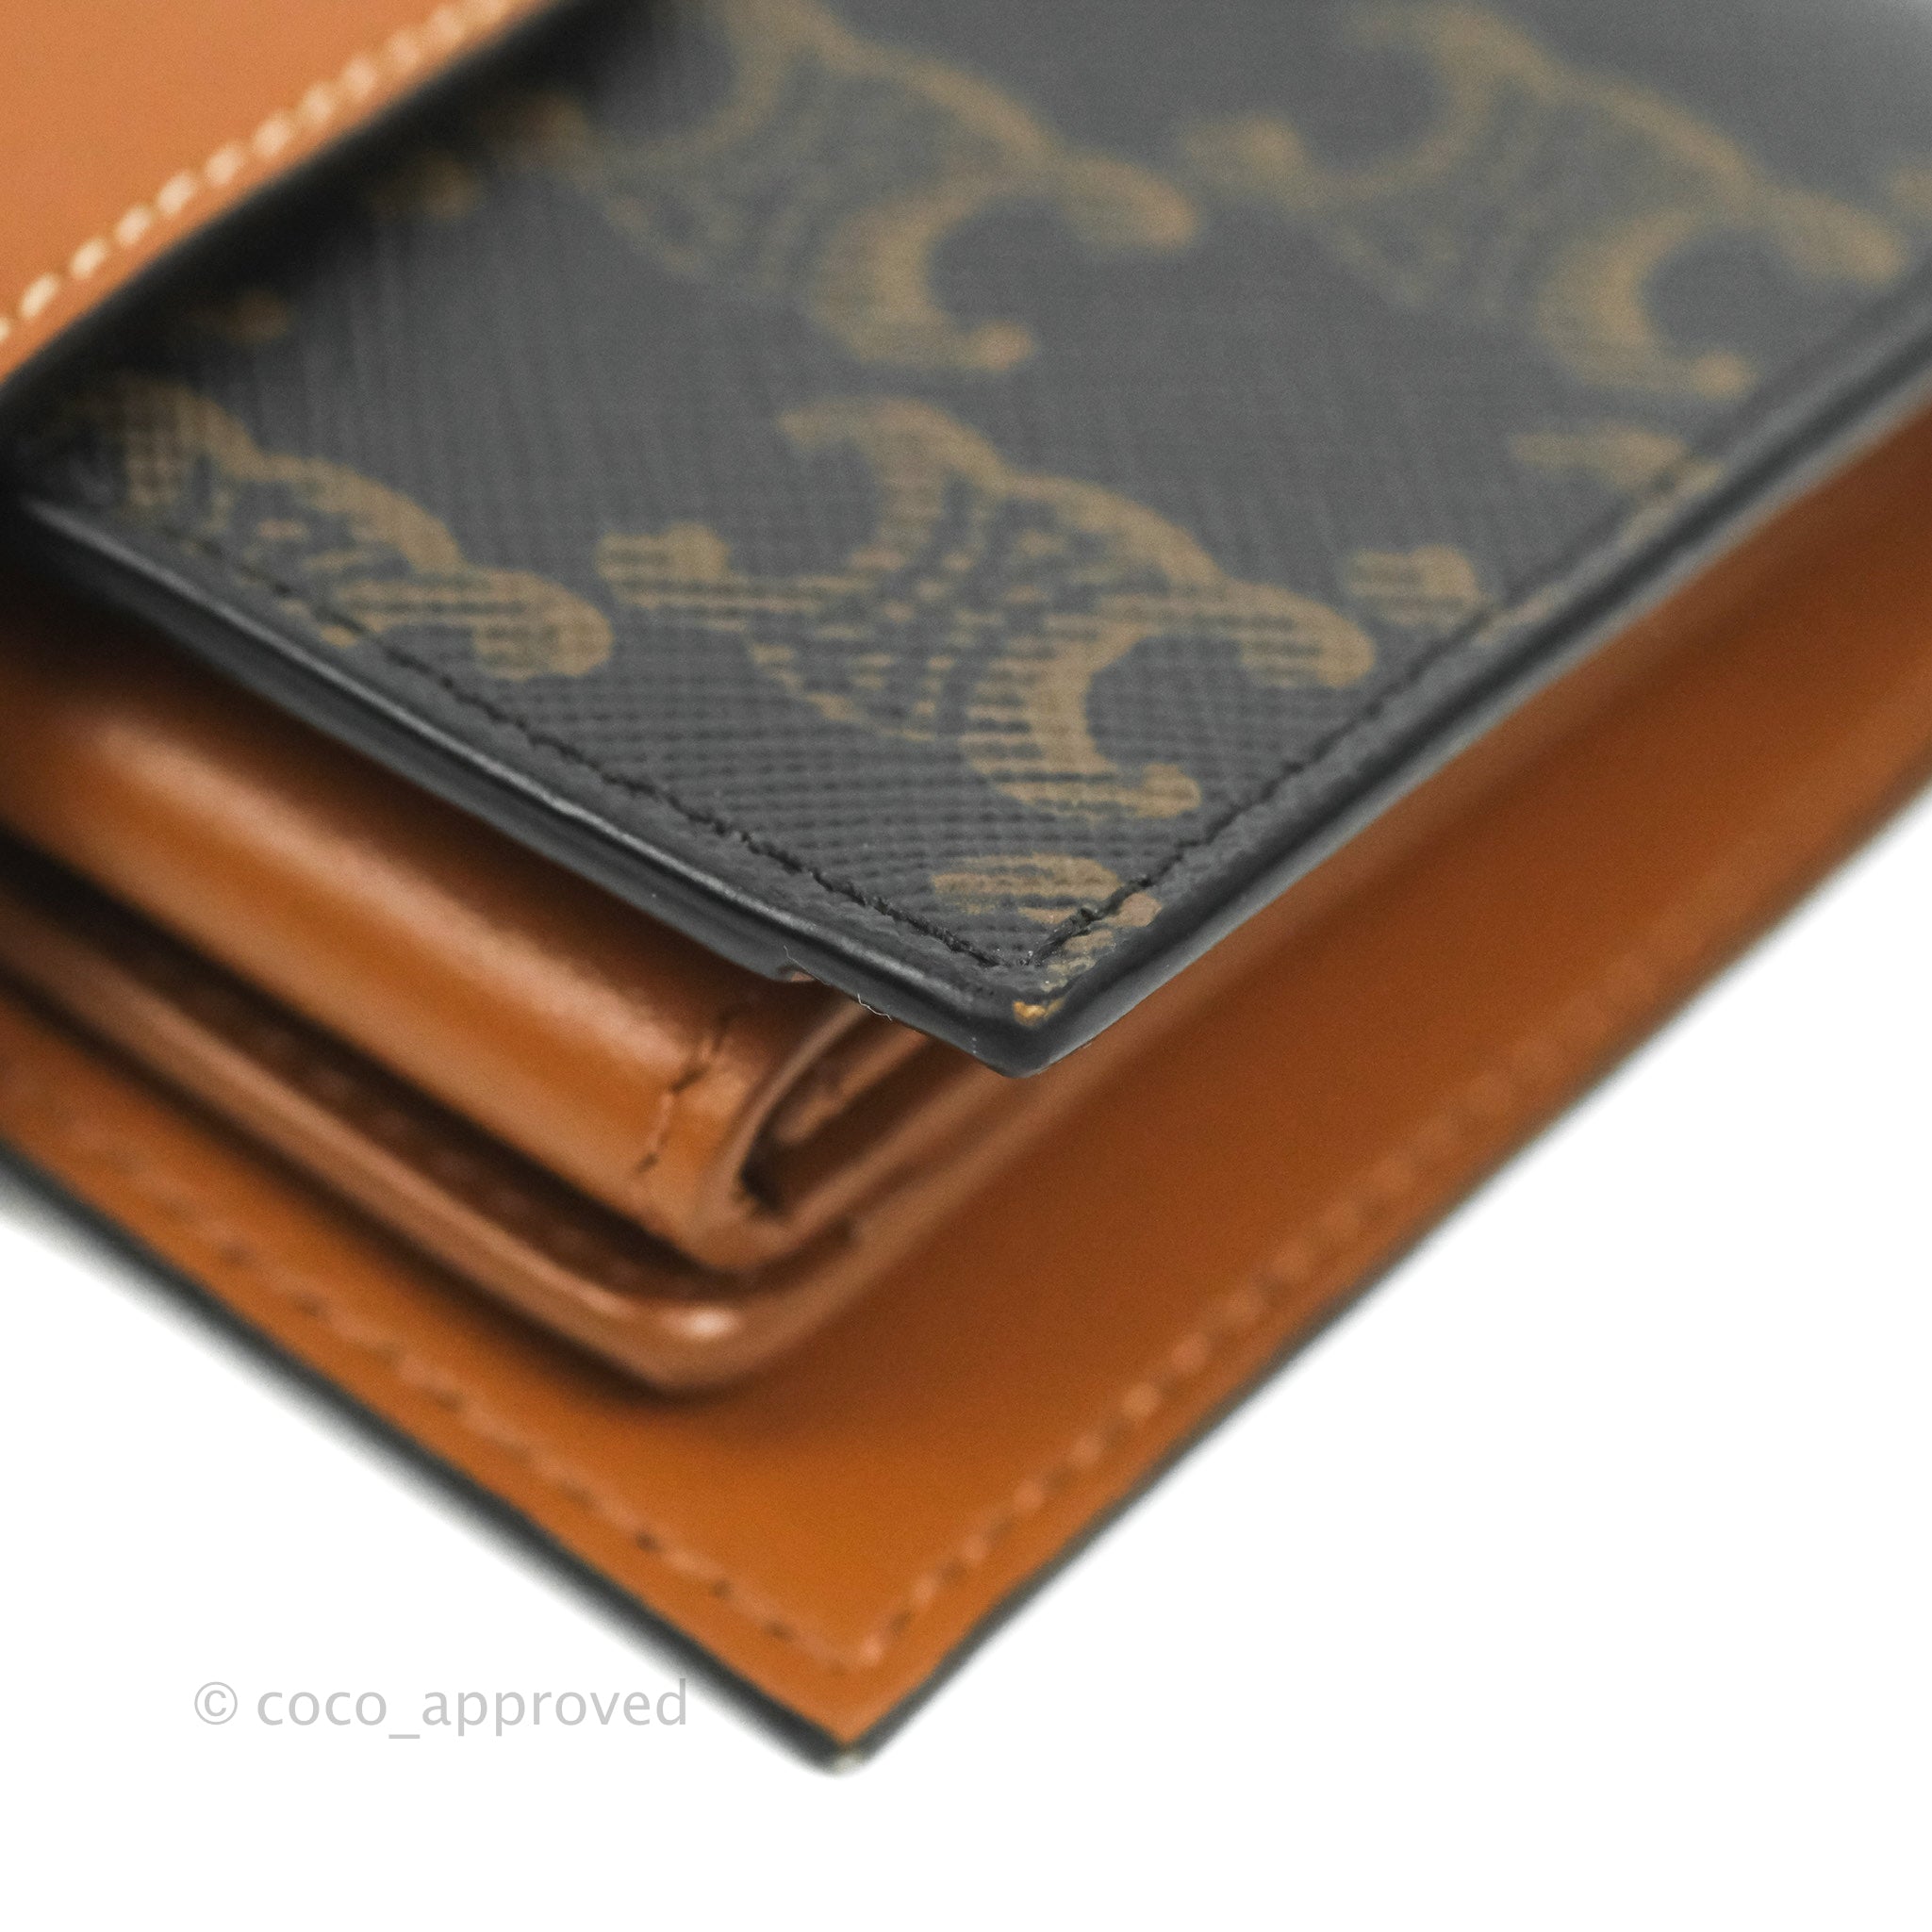 WALLET ON STRAP IN TRIOMPHE CANVAS AND SMOOTH LAMBSKIN - TAN